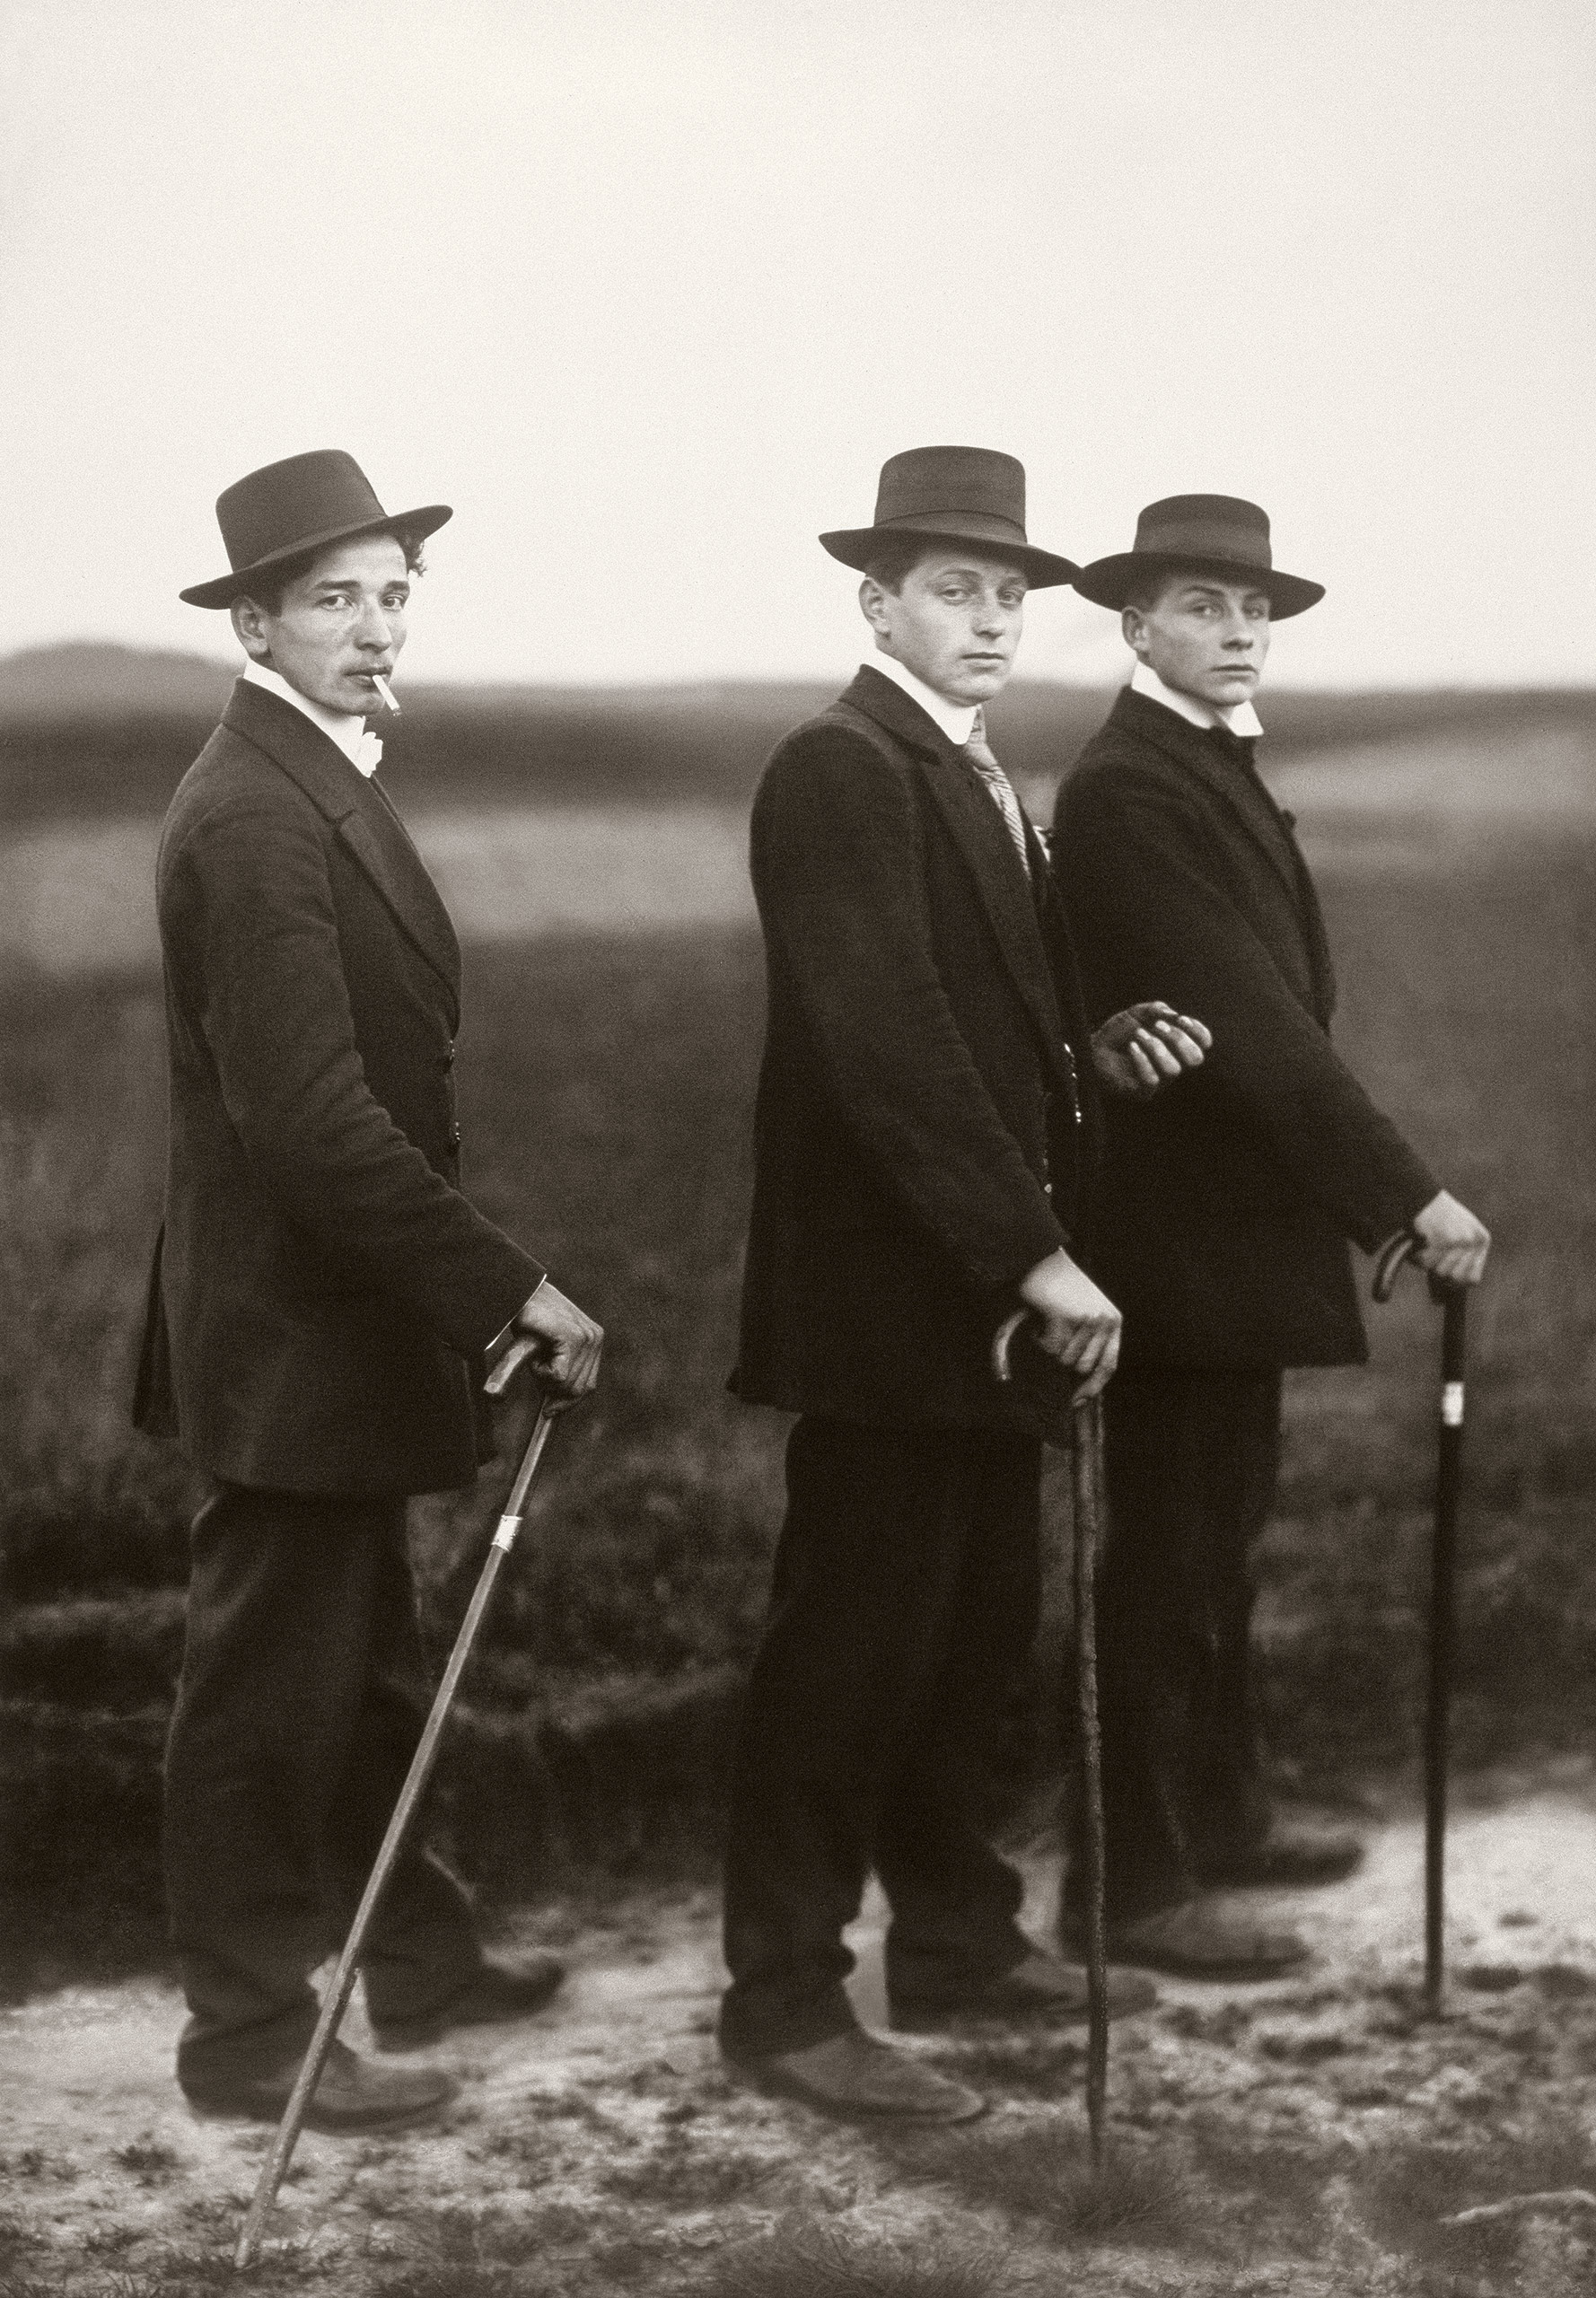 Young Farmers, from the series "People of the 20th Century". 1914.